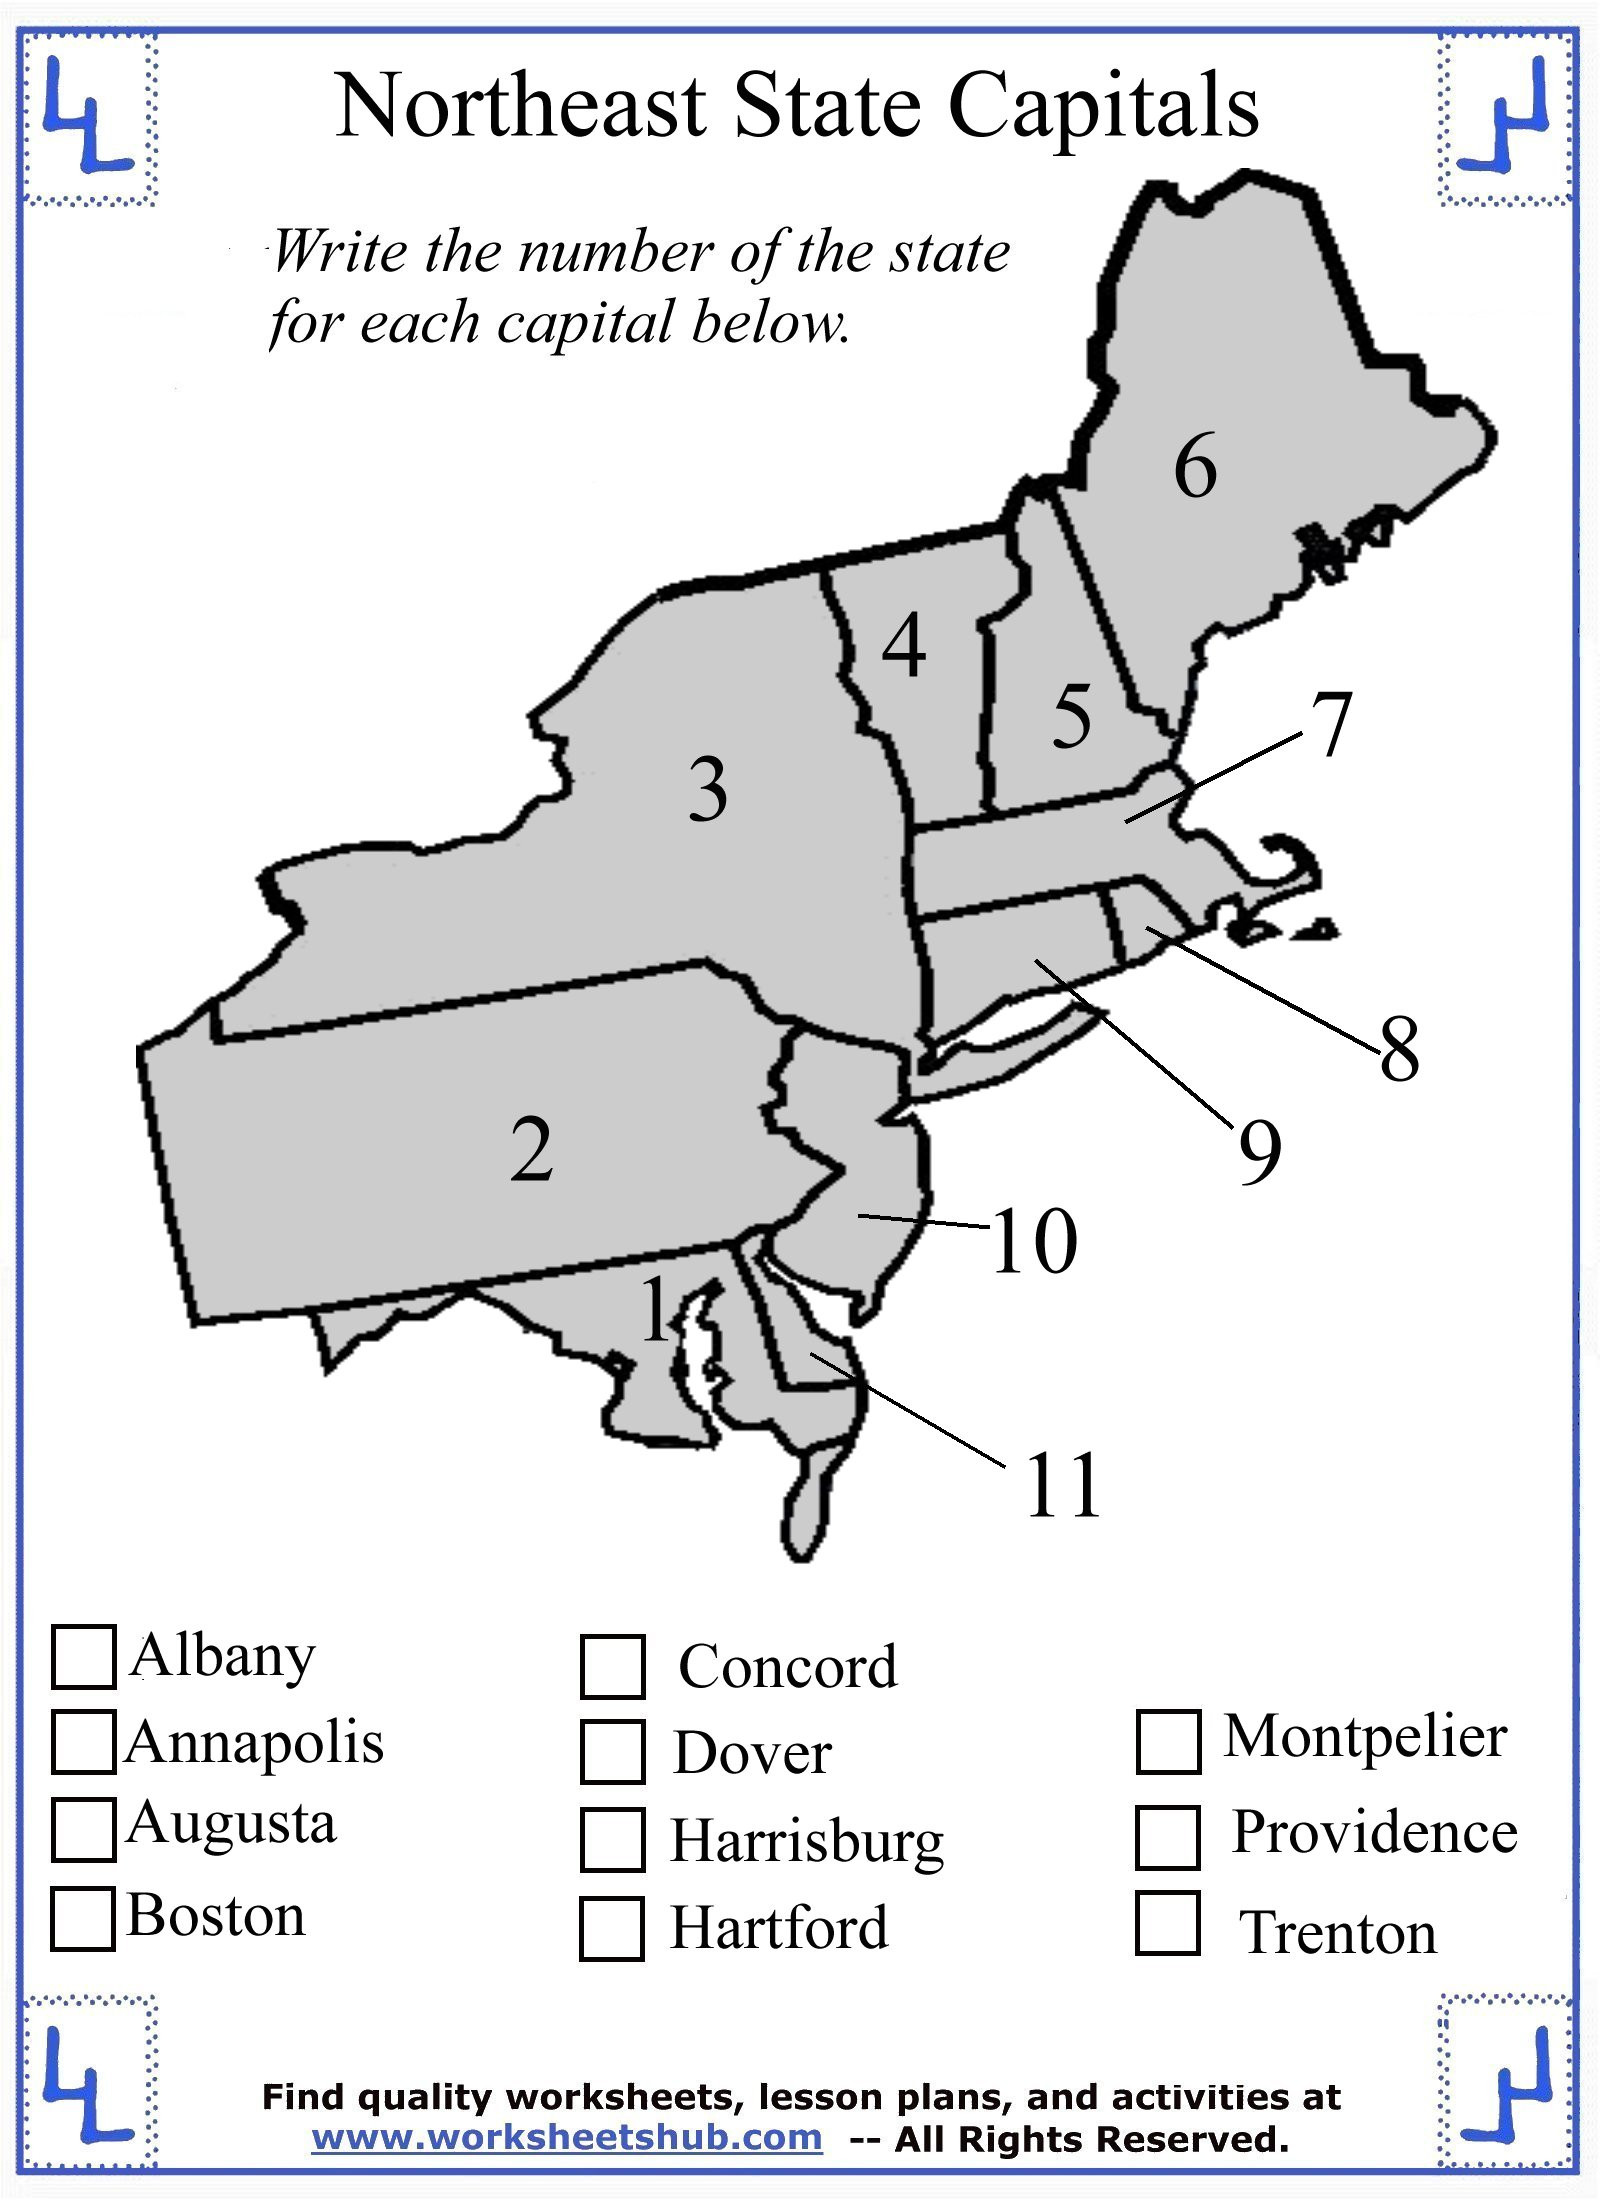 States and Capitals Quiz Printable Fourth Grade social Stu S northeast Region States and